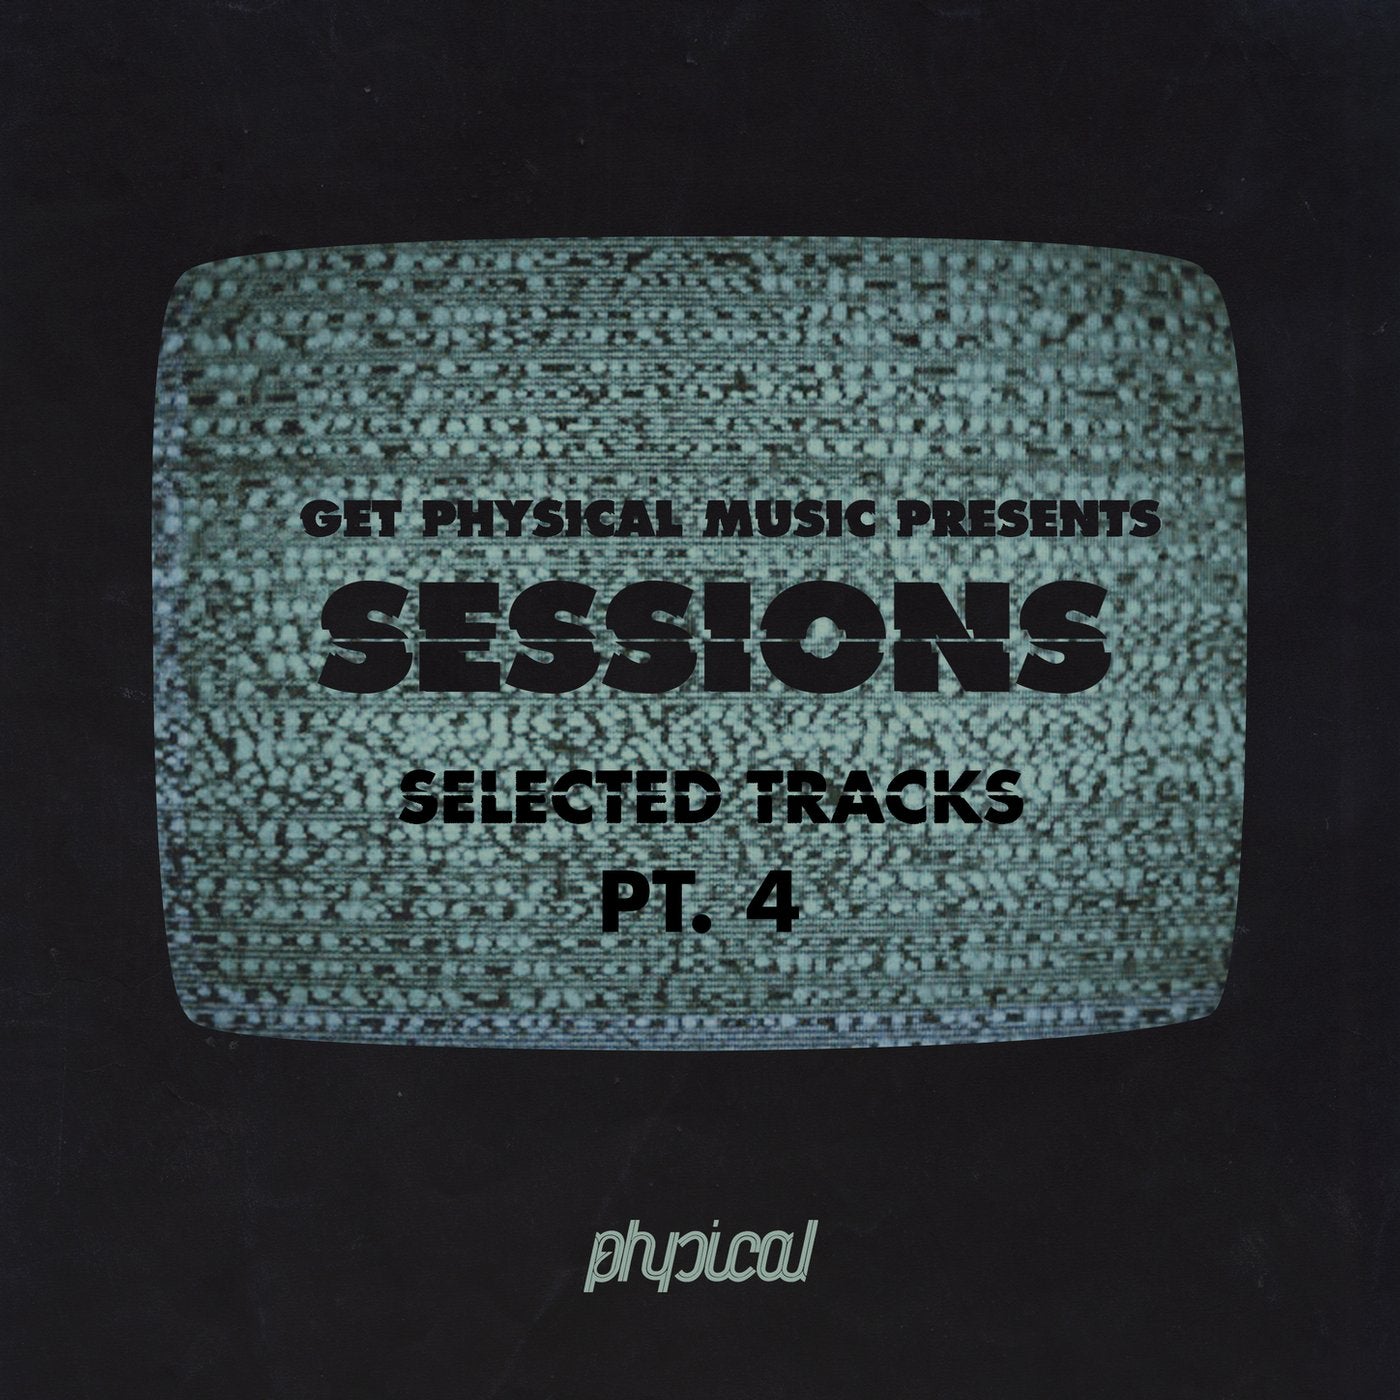 Get Physical Music Presents: Sessions - Selected Tracks, Pt. 4